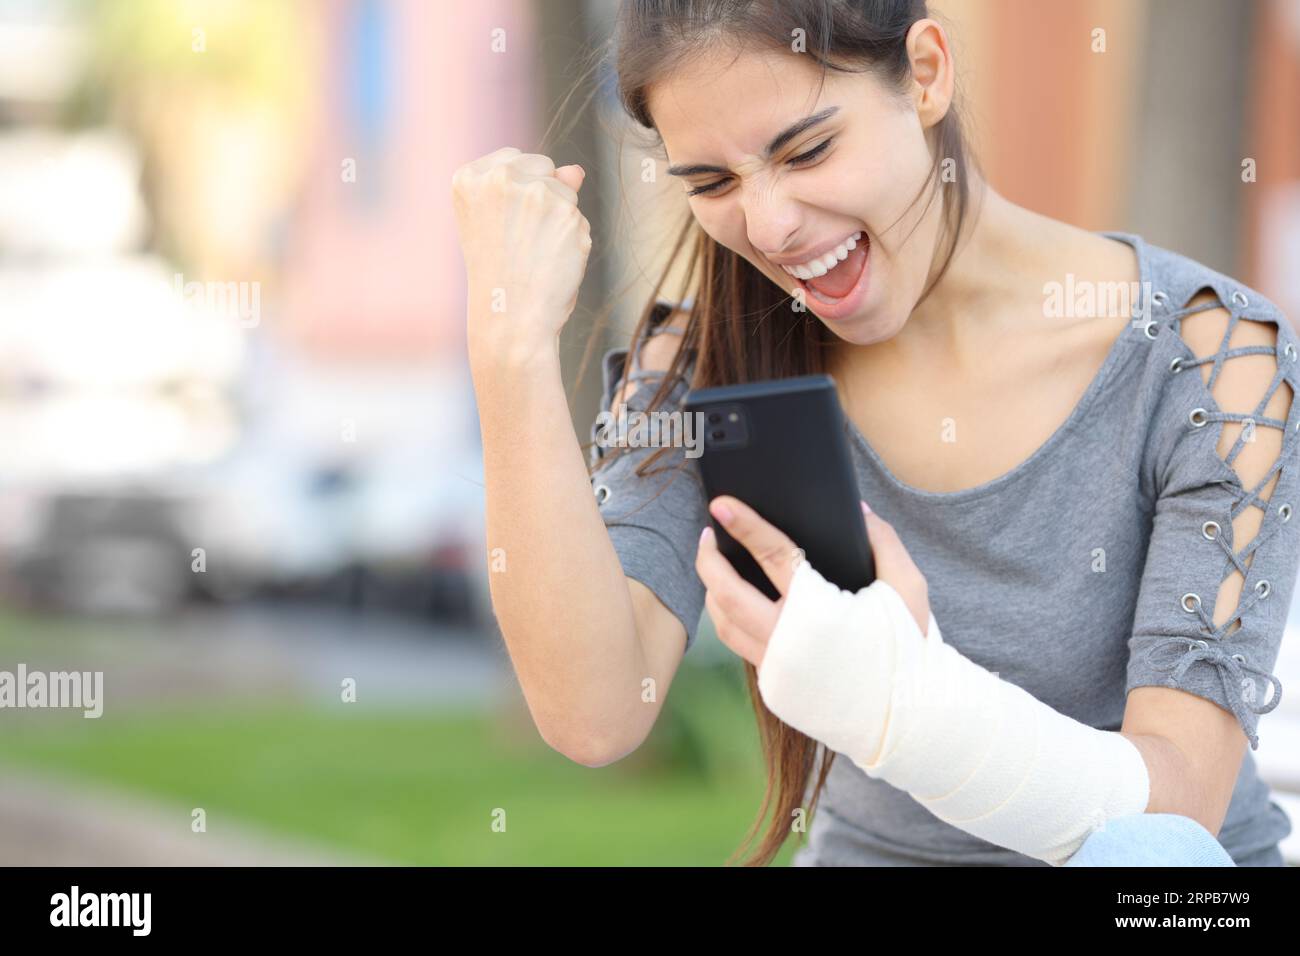 Excited convalescent woman celebrating good news checking phone in the street Stock Photo